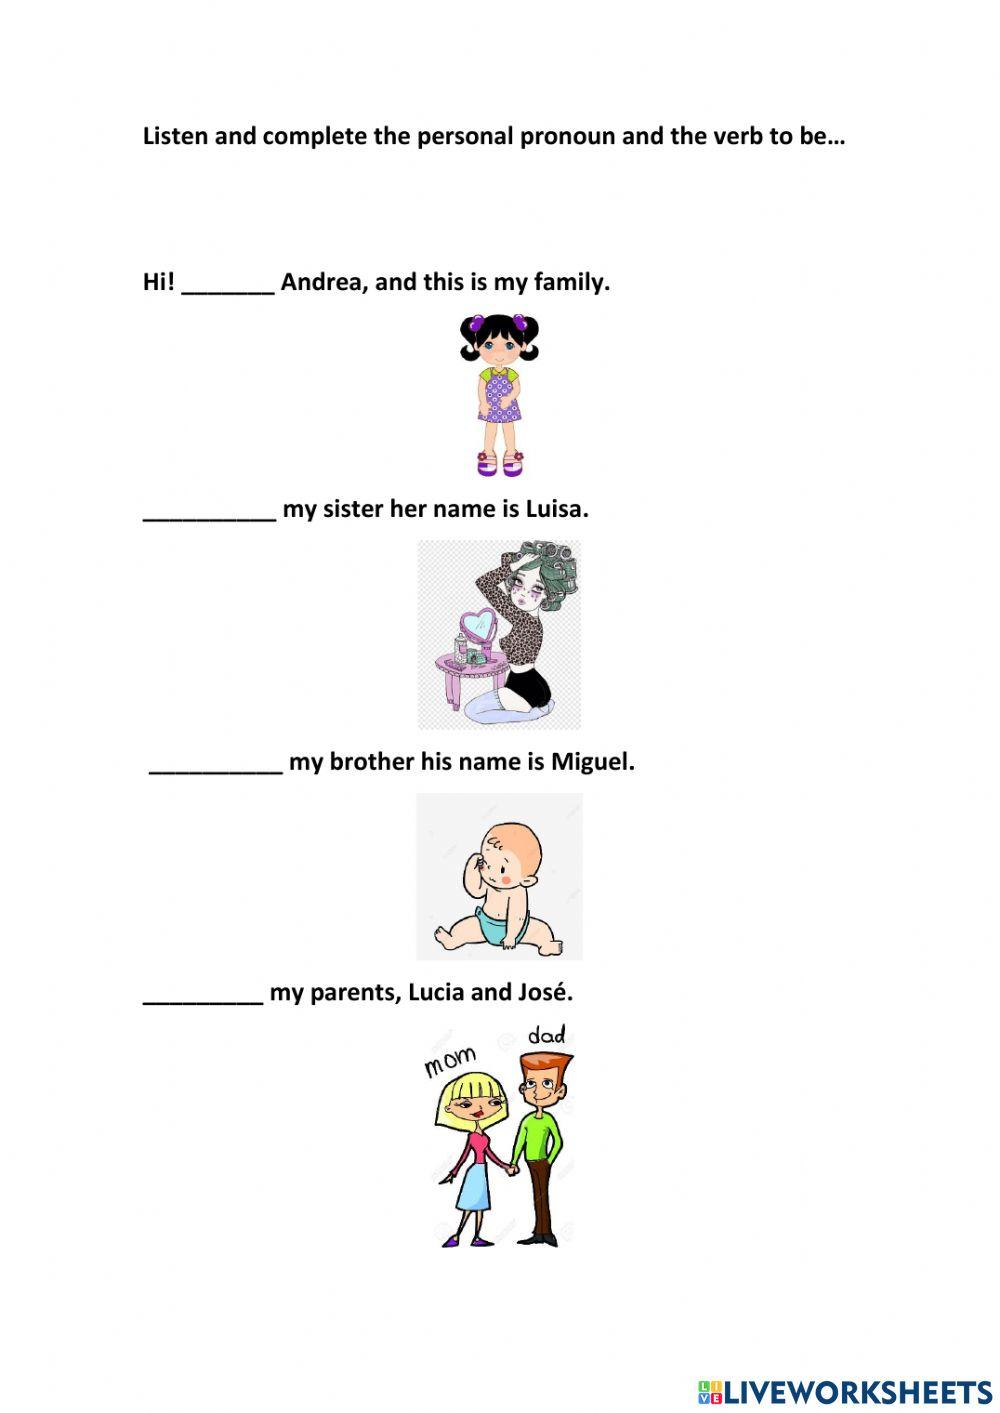 Personal pronouns and verb to be